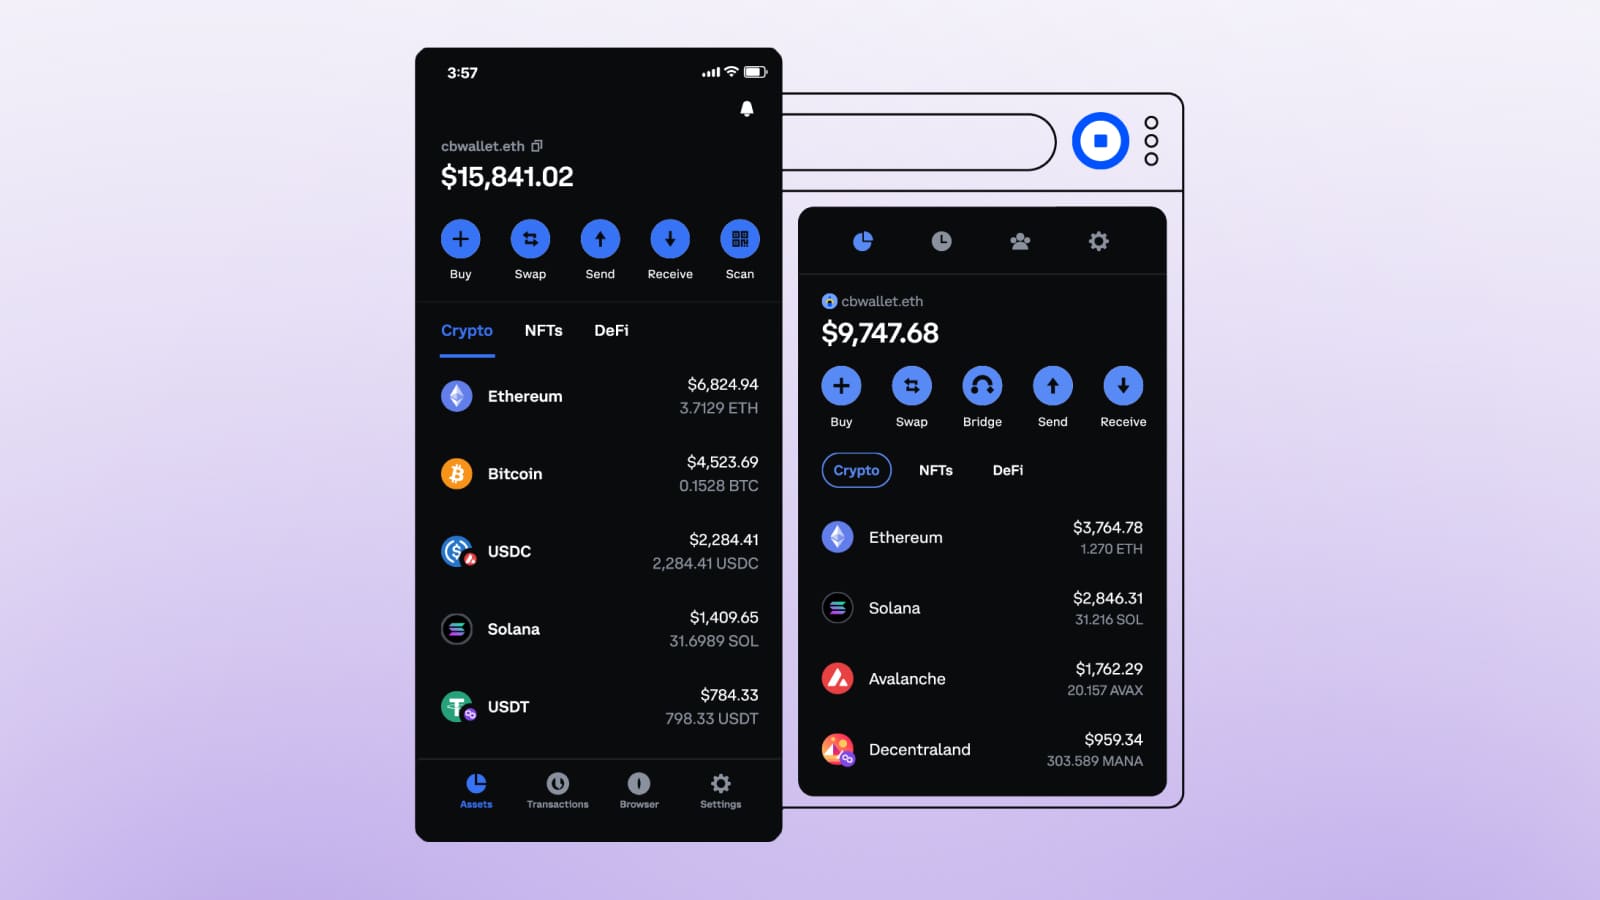 Coinbase Wallet for cryptocurrency has mobile and browser versions.